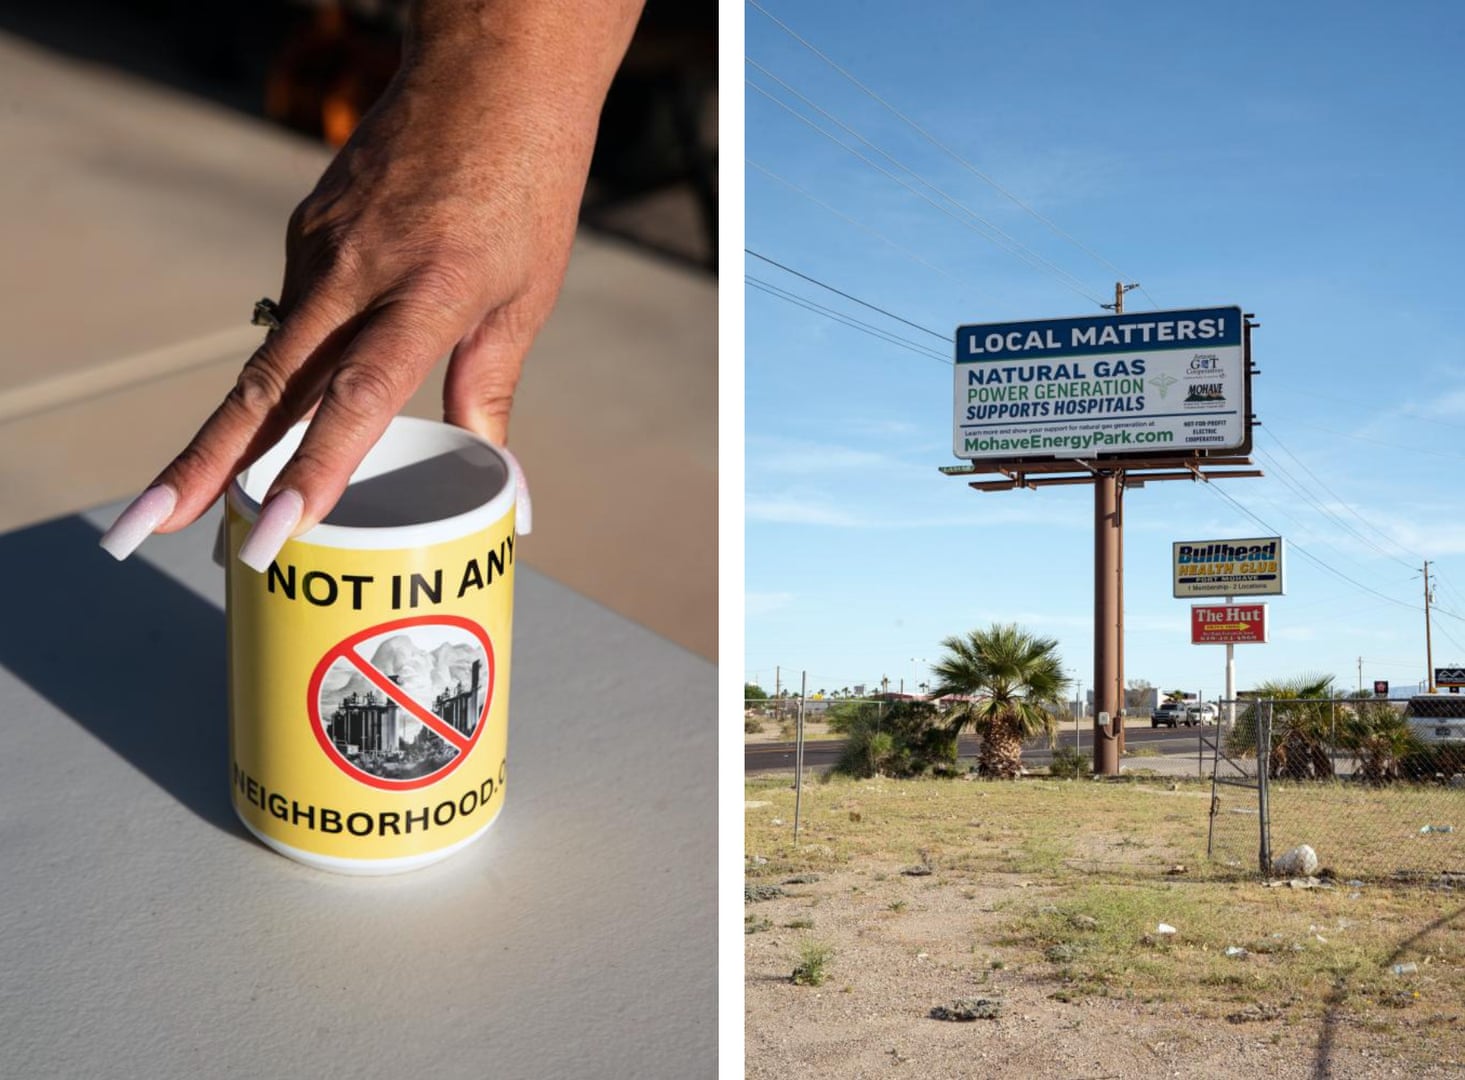 composite photo of hand reaching for a yellow mug and a billboard